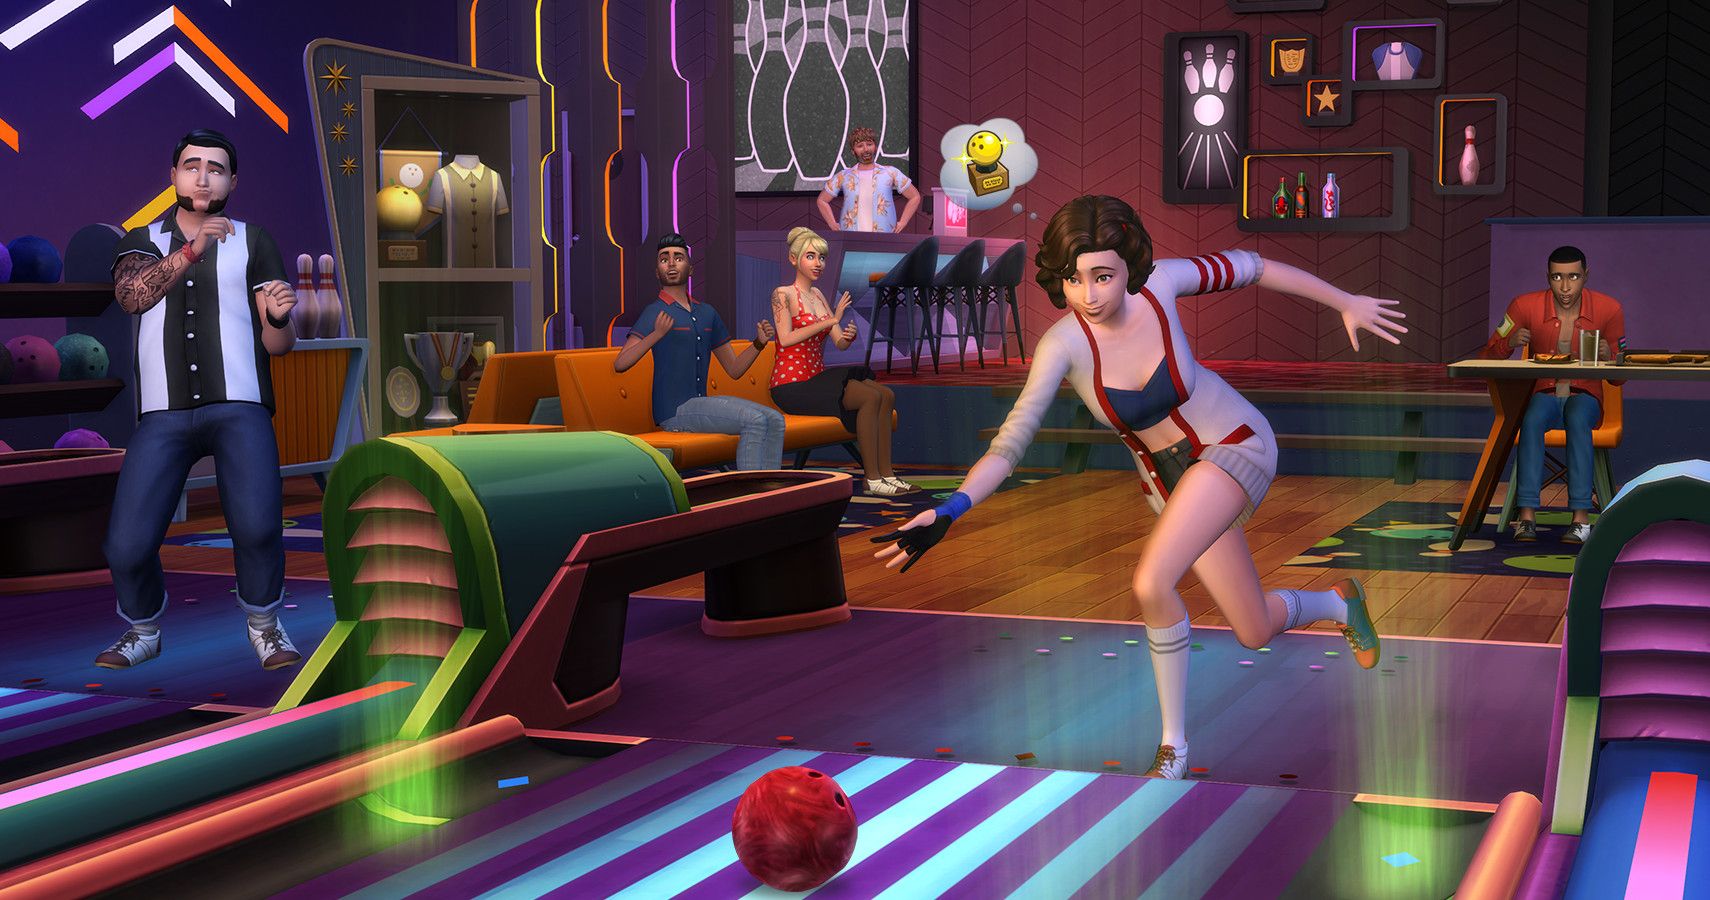 A sim bowling as friends look on.